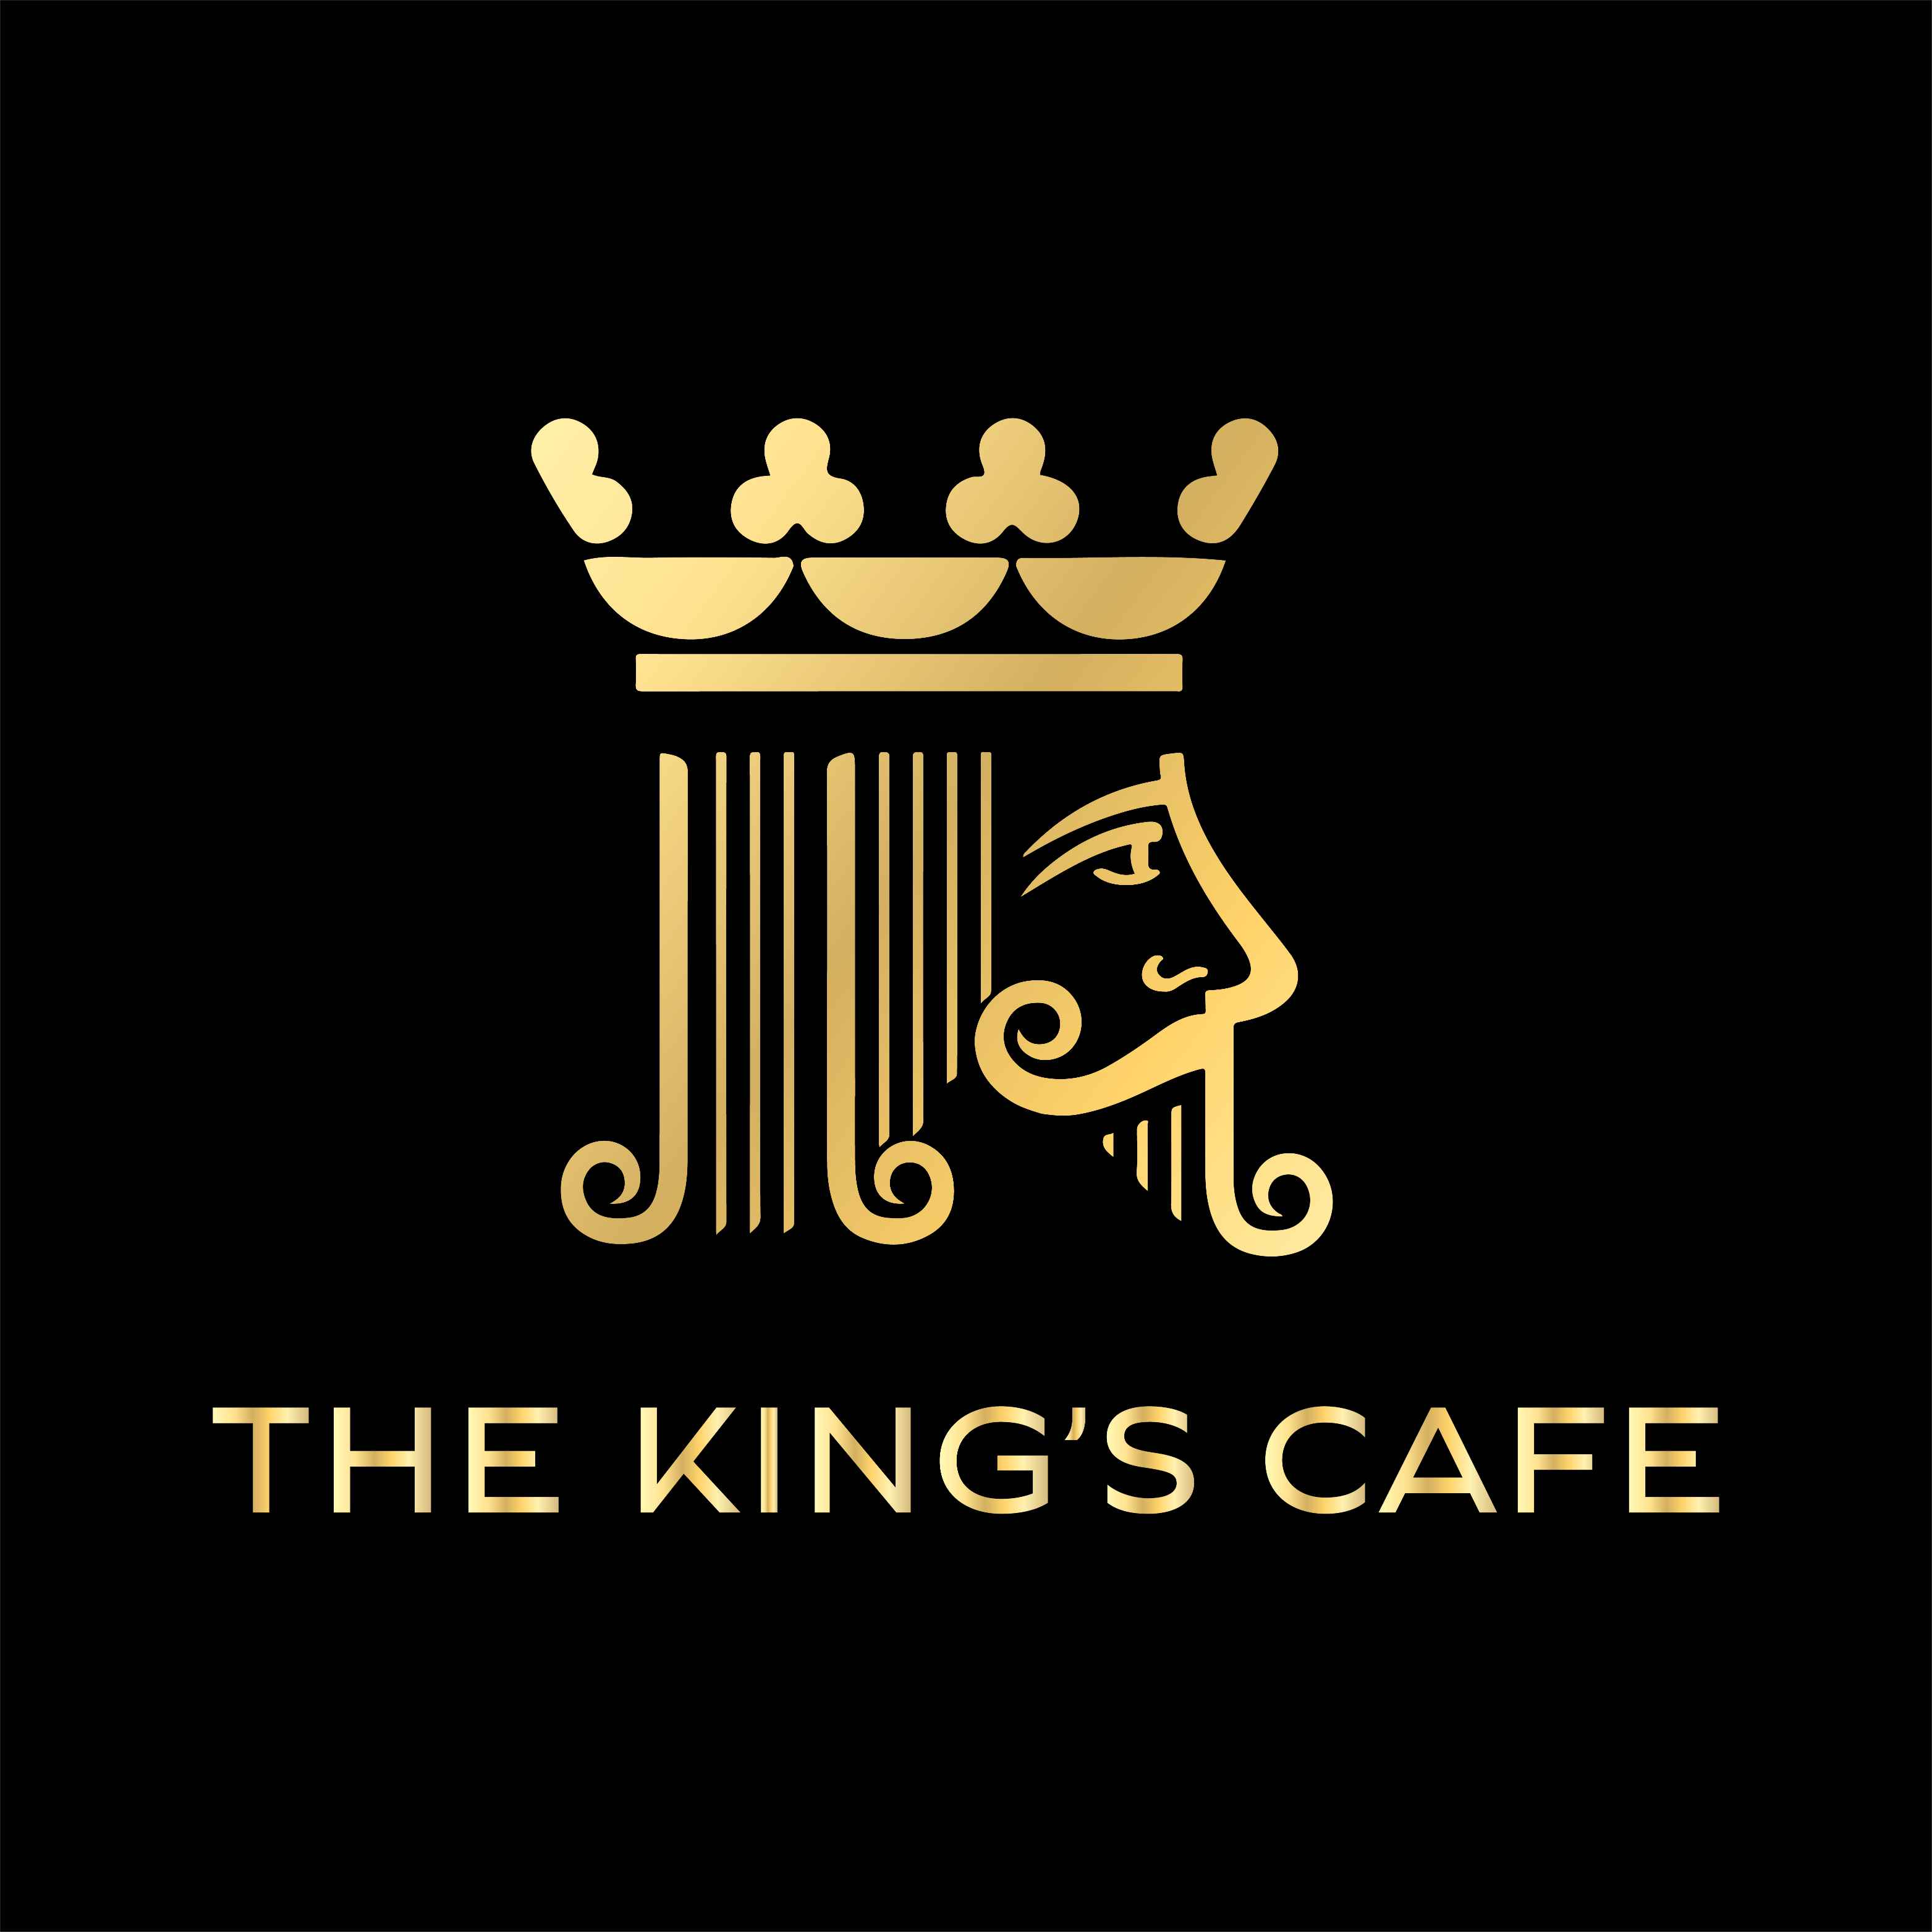 The king's cafe